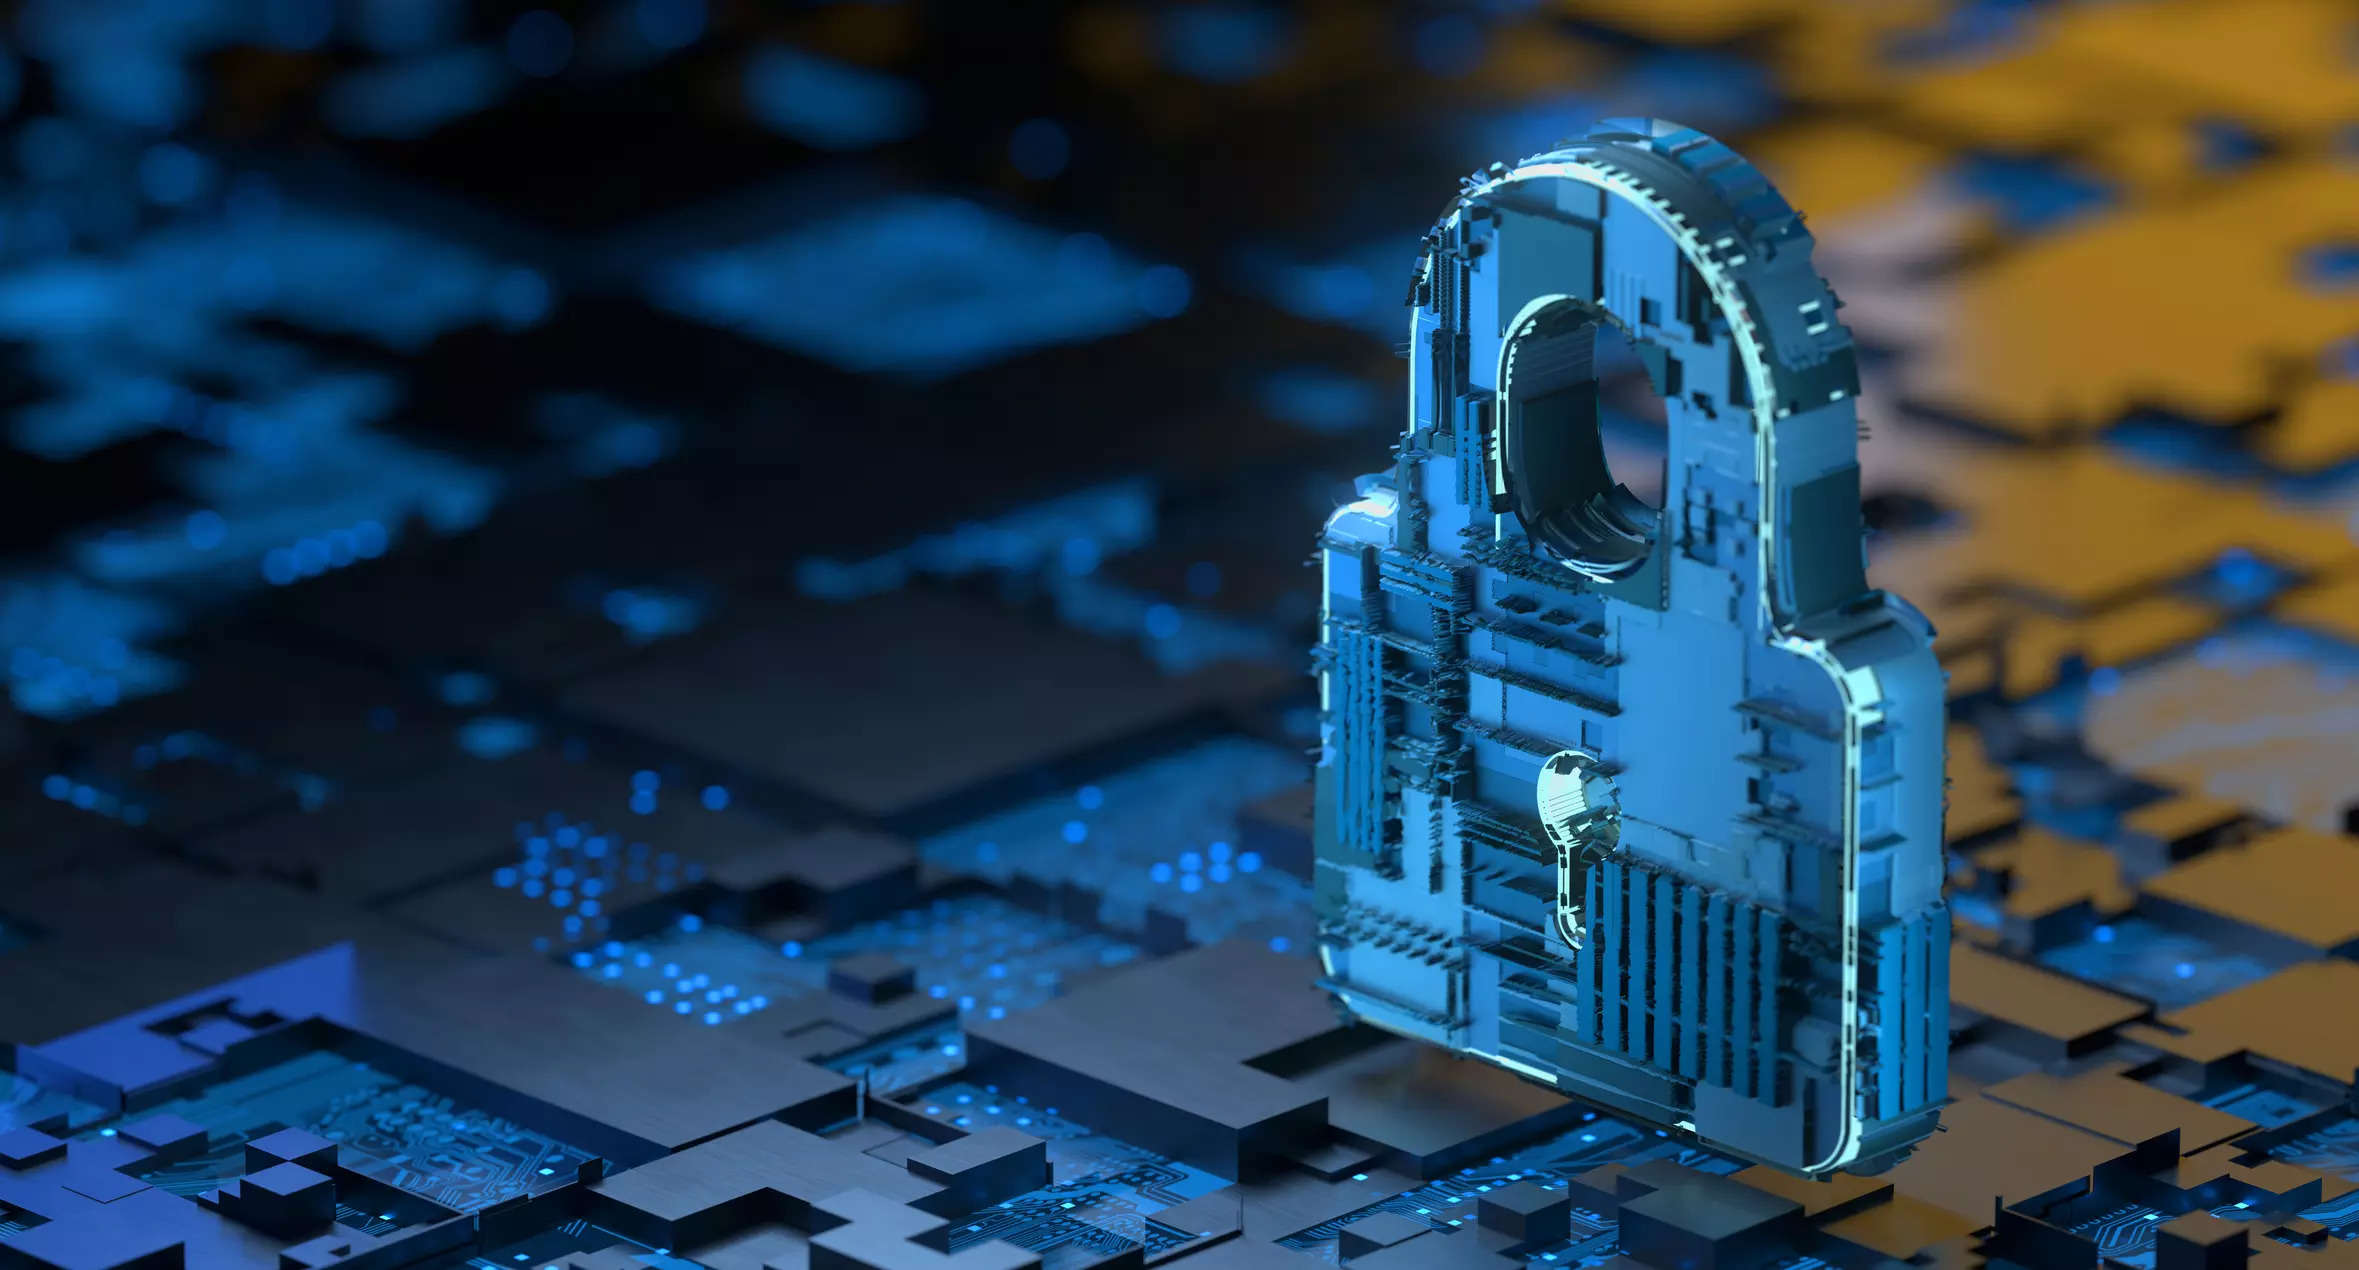 <p>The commercial 5G rollout, industry 4.0, and the proliferation of IoT devices have made the need for robust cybersecurity more critical than ever.</p>